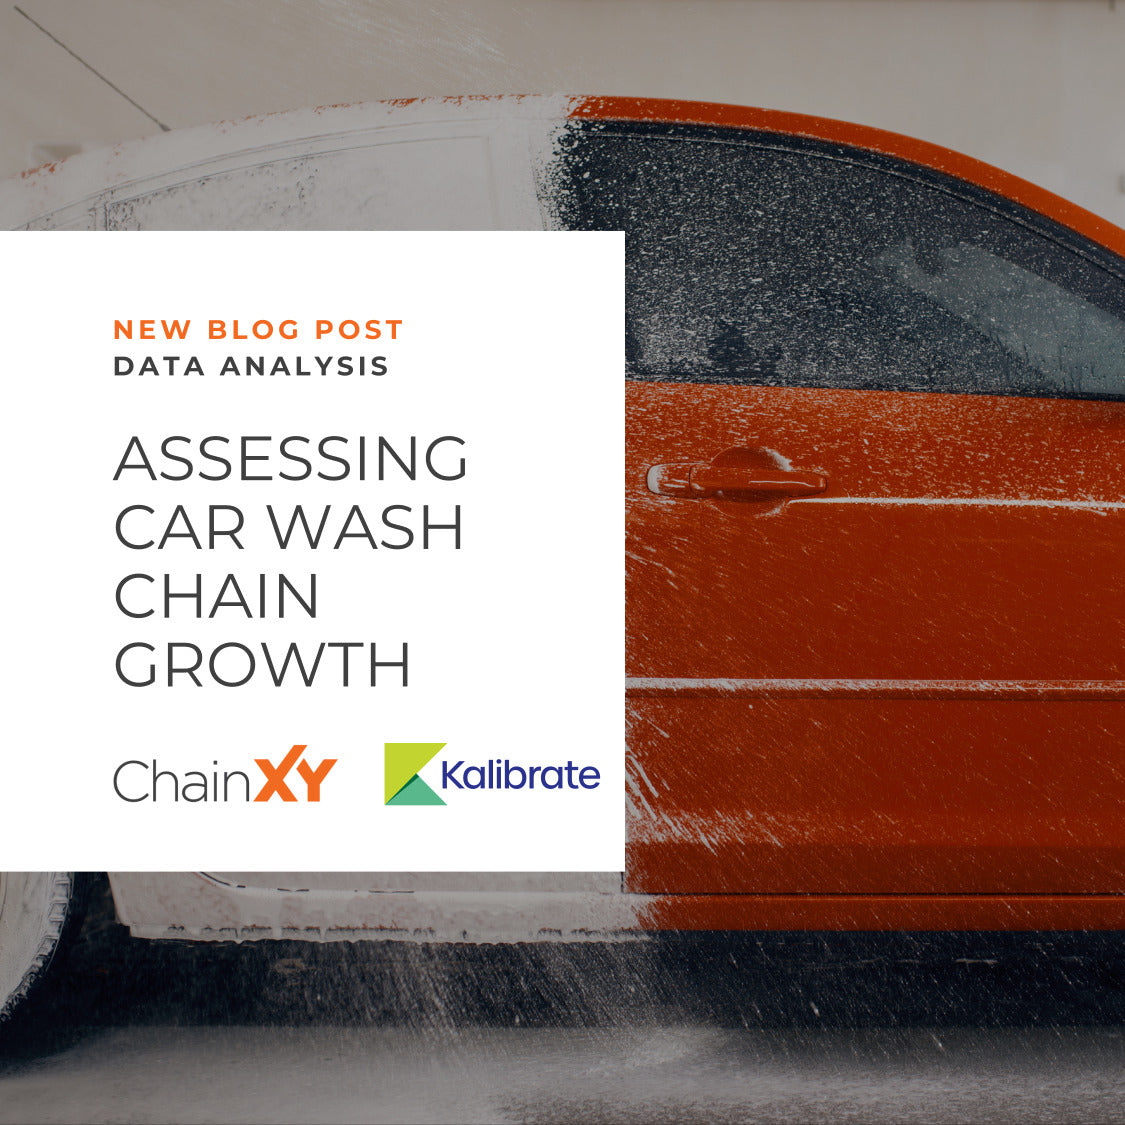 Background of orange car half covered in suds at a car wash. Text reads: New Blog Post Data Analysis - Assessing Car Wash Chain Growth with ChainXY and Kalibrate